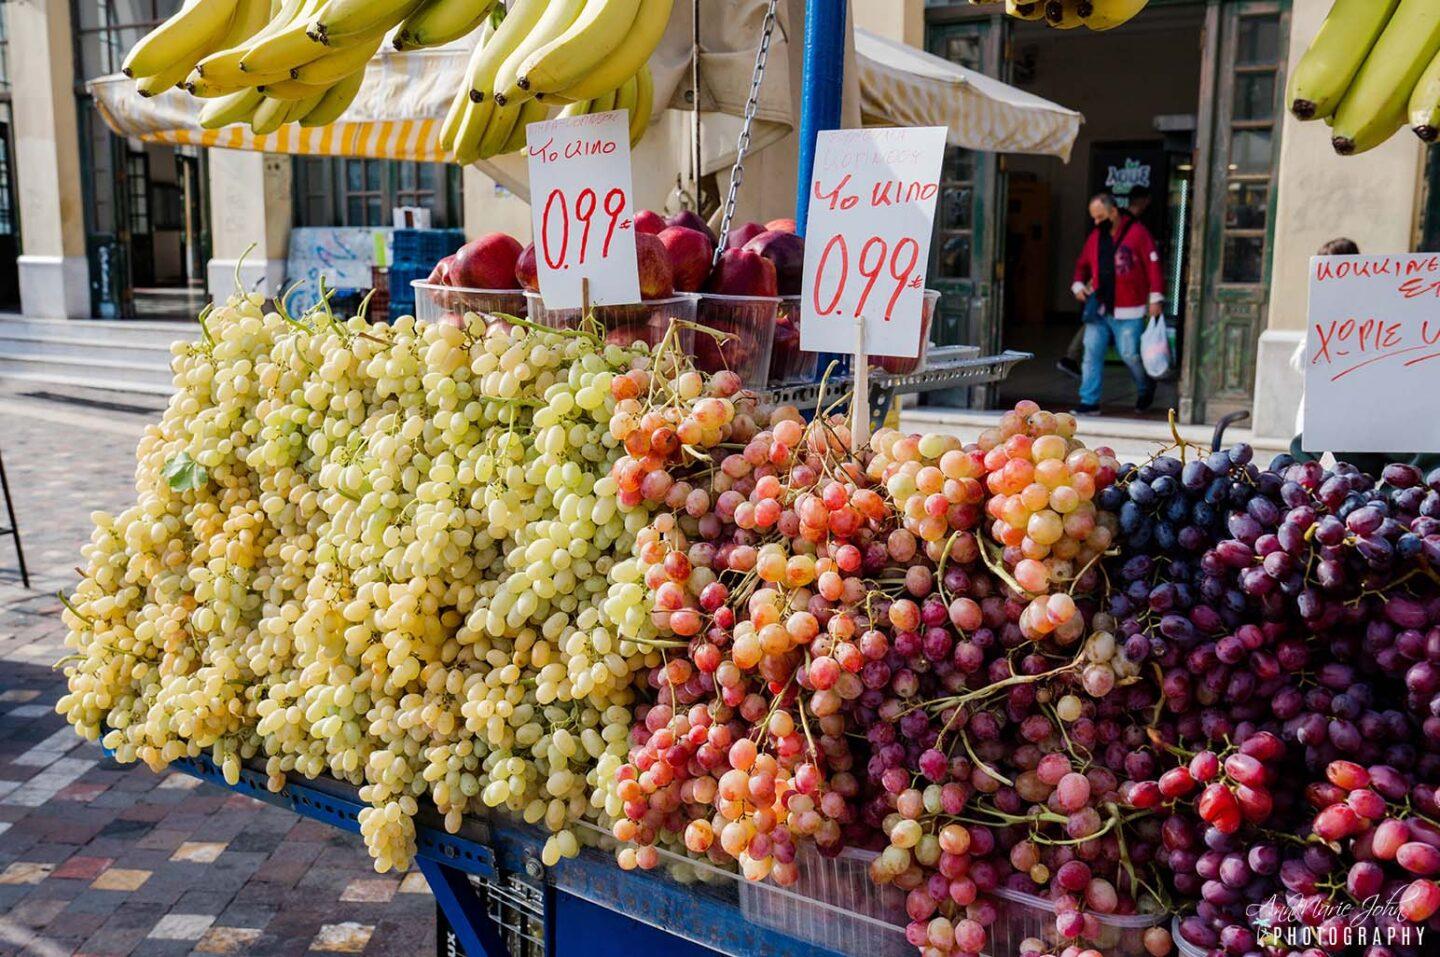 Ways To Make The Most of Spring - Visit a Farmers Market